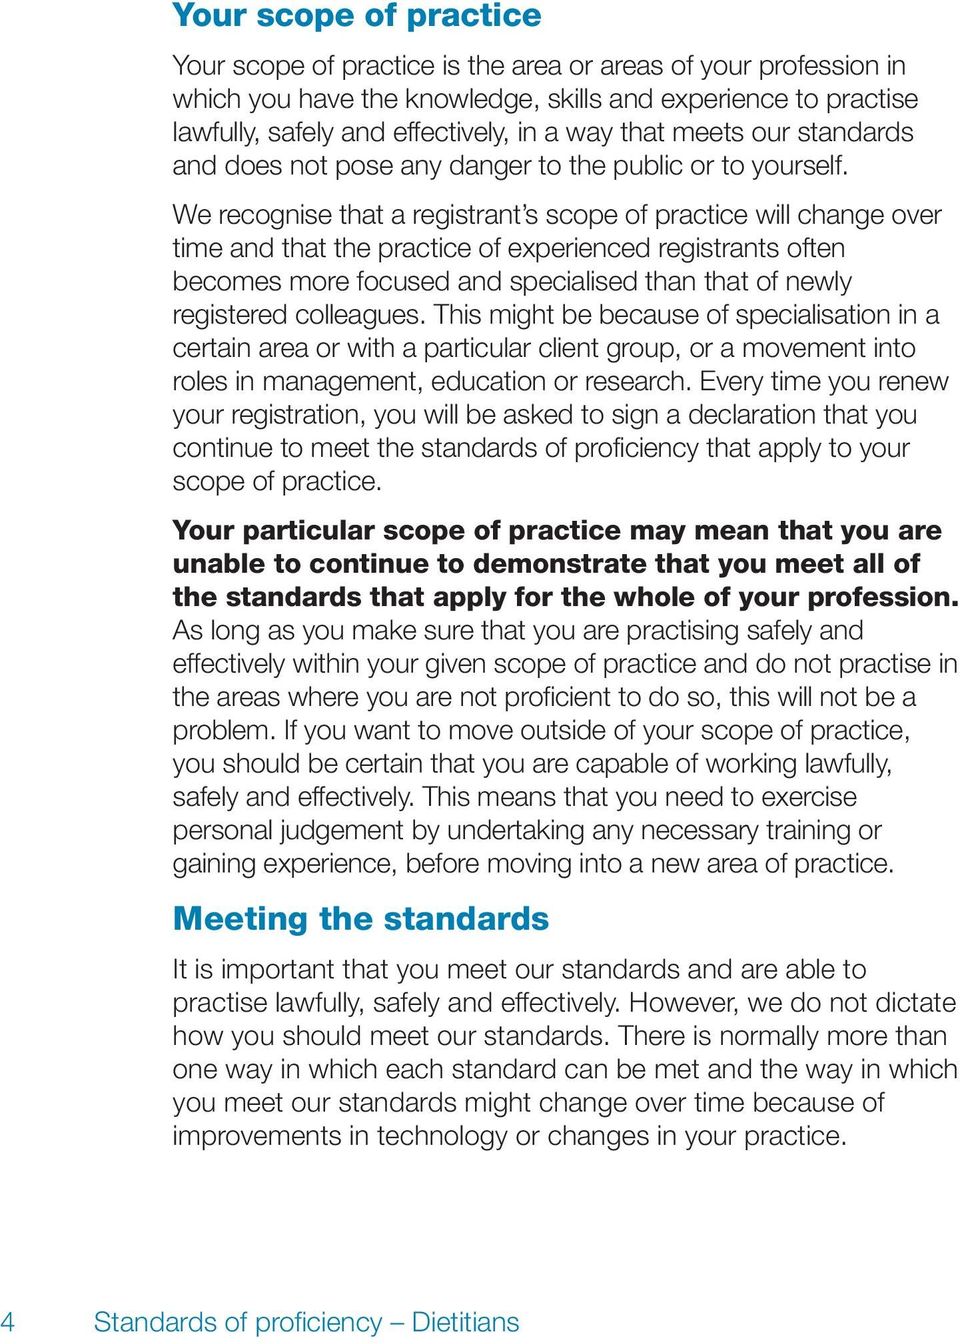 We recognise that a registrant s scope of practice will change over time and that the practice of experienced registrants often becomes more focused and specialised than that of newly registered